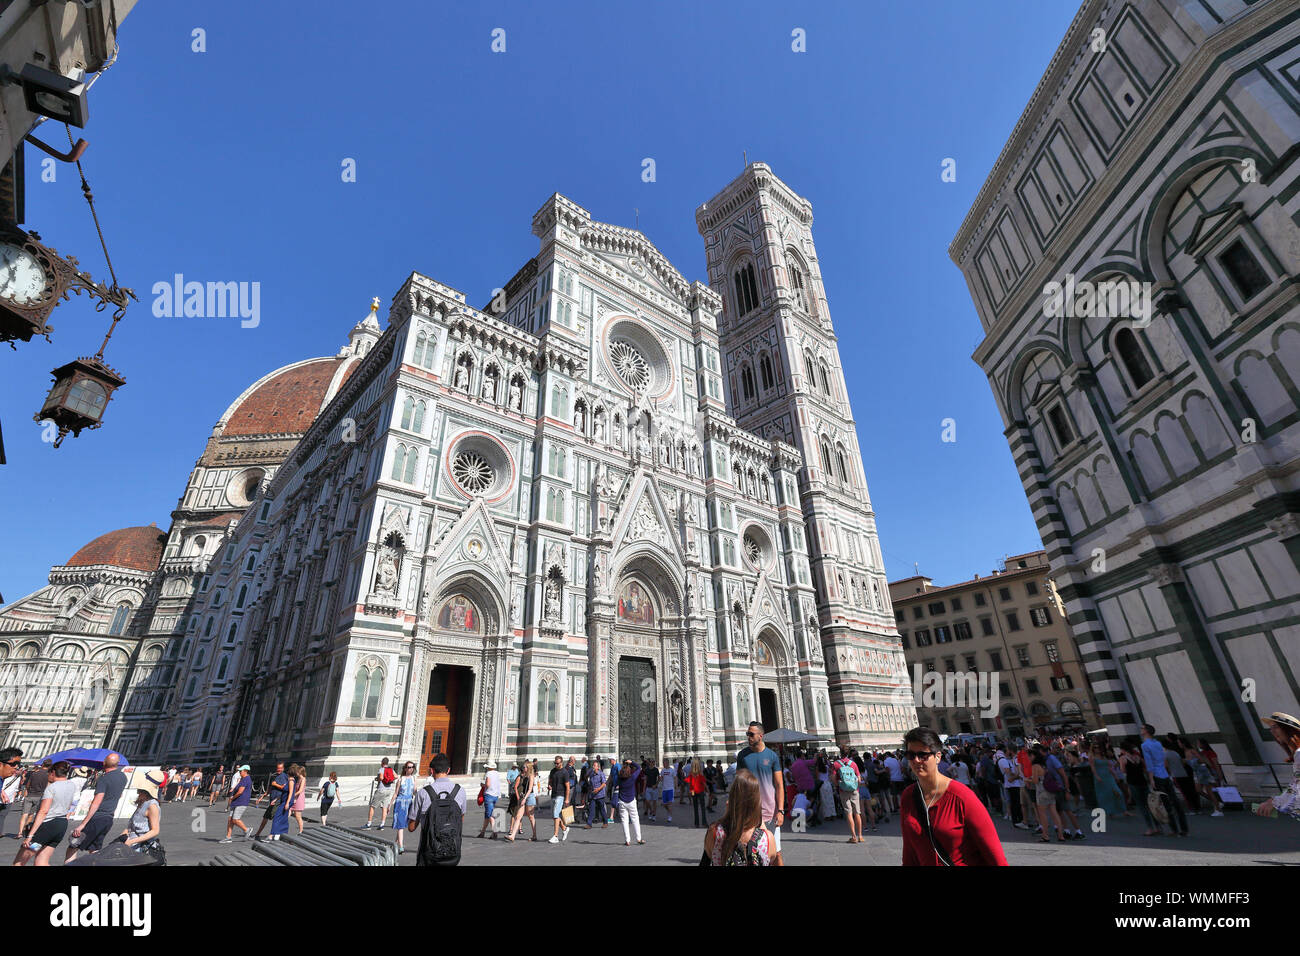 Piazza del Duomo, Florence / Italy - June 20th 2019: Toursits walk around the famous piazza with its maginificant architecture. Stock Photo